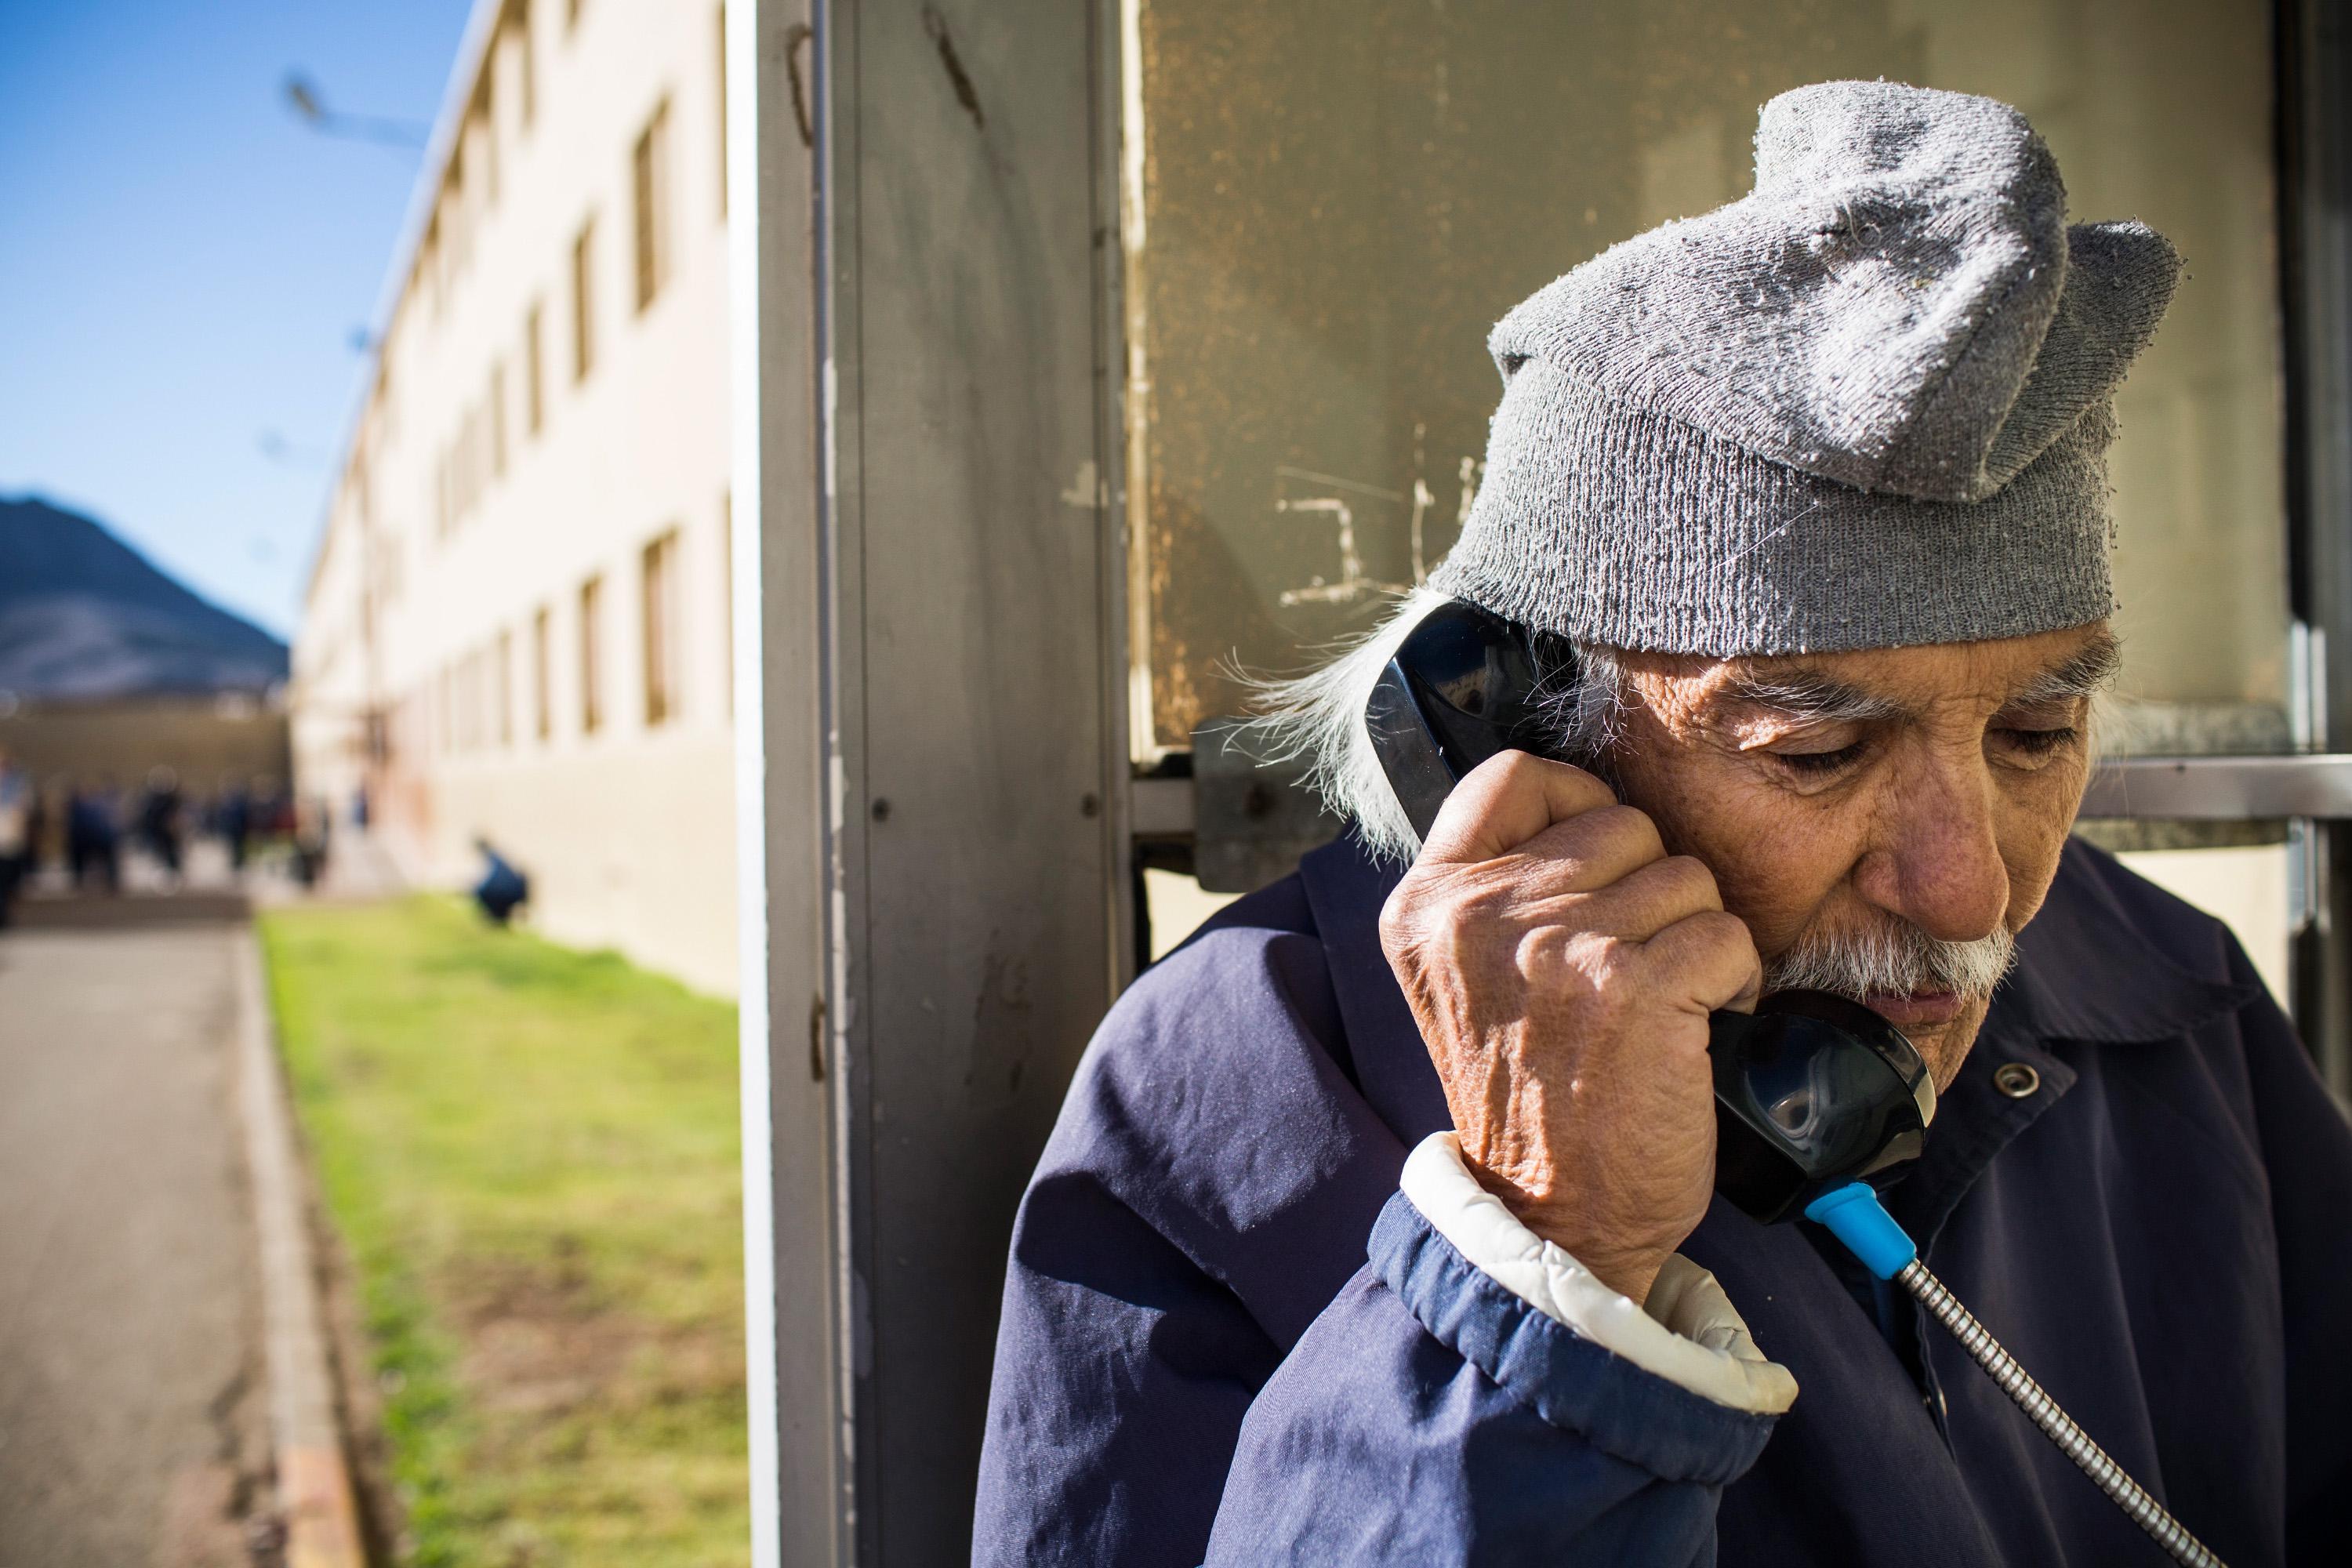 An elderly man talks on a wired phone next to a prison yard.